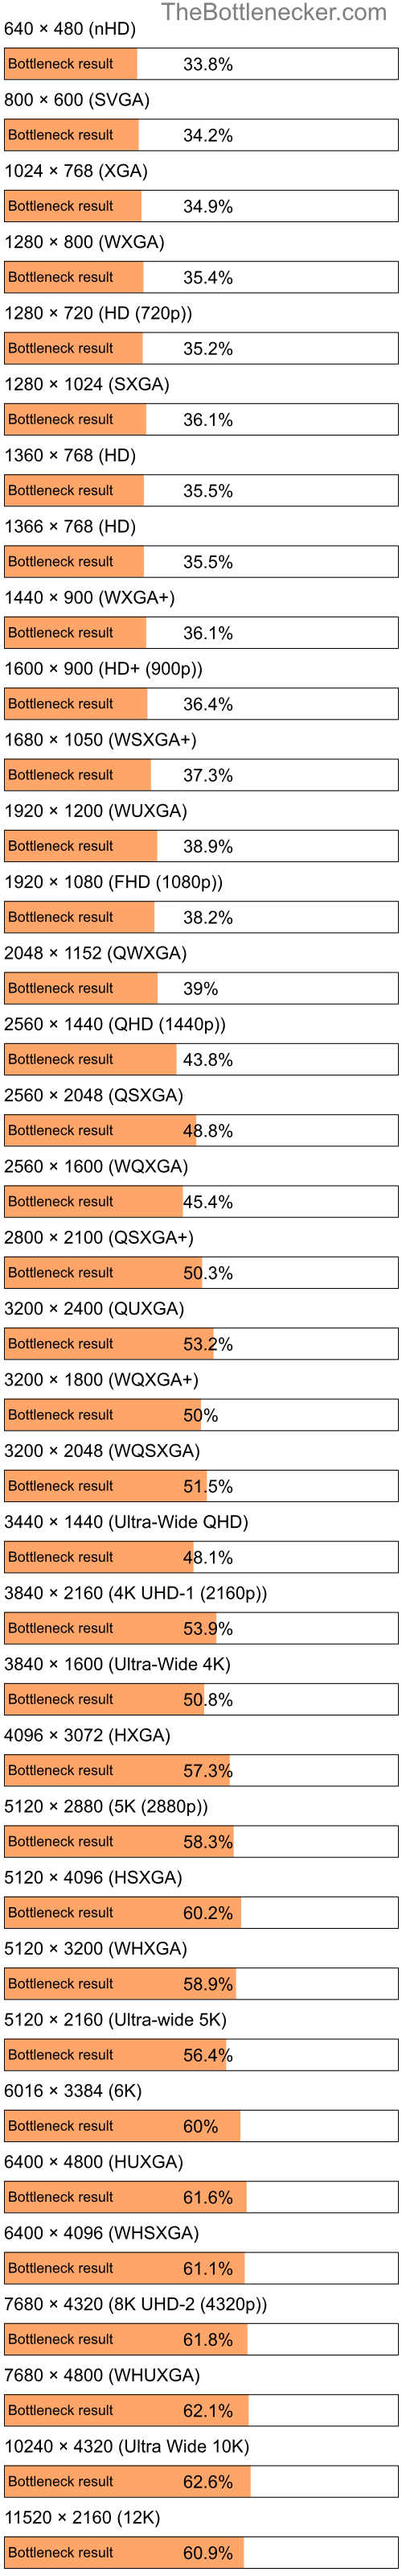 Bottleneck results by resolution for AMD Ryzen Threadripper PRO 5975WX and NVIDIA GeForce GTX 1650 in General Tasks